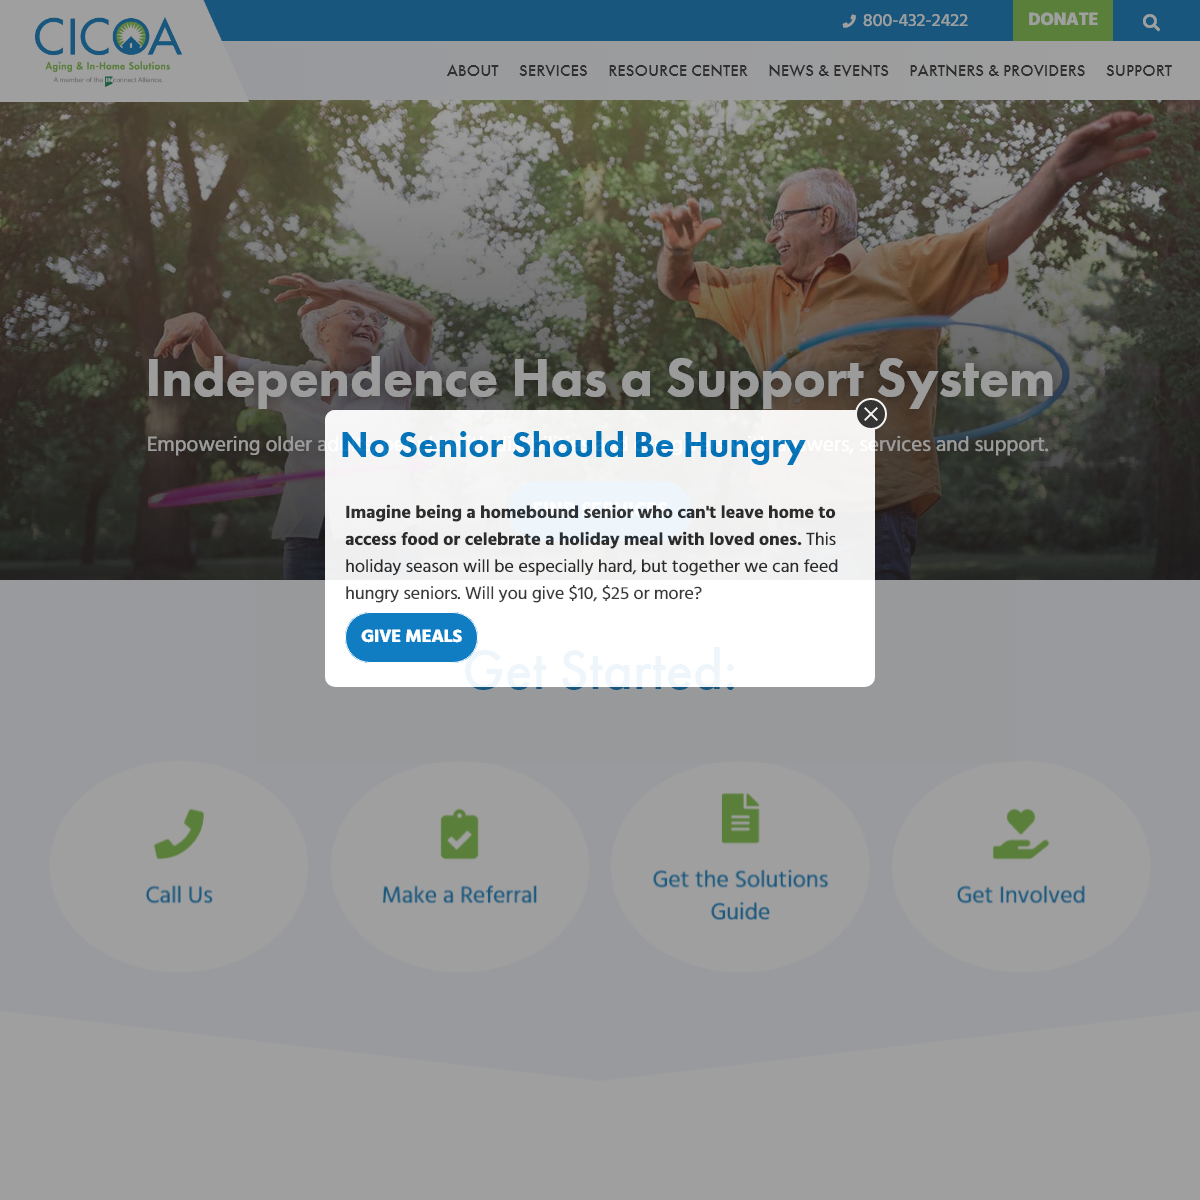 A complete backup of cicoa.org